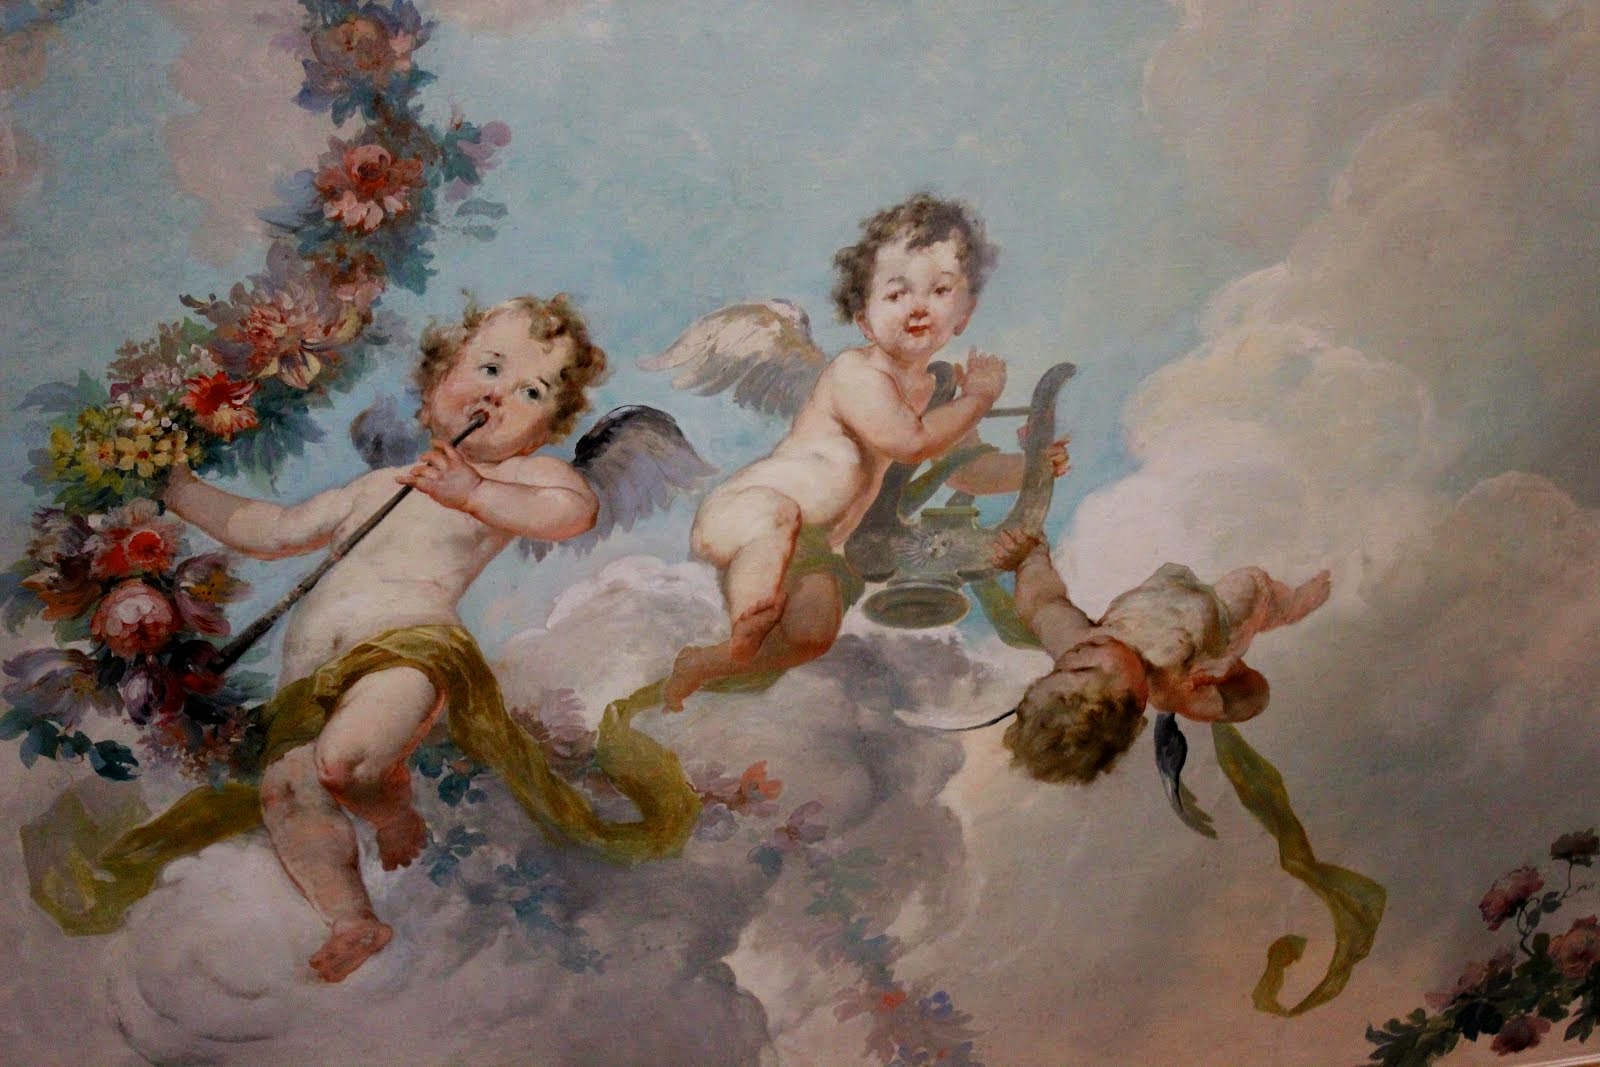 Ceiling Painting